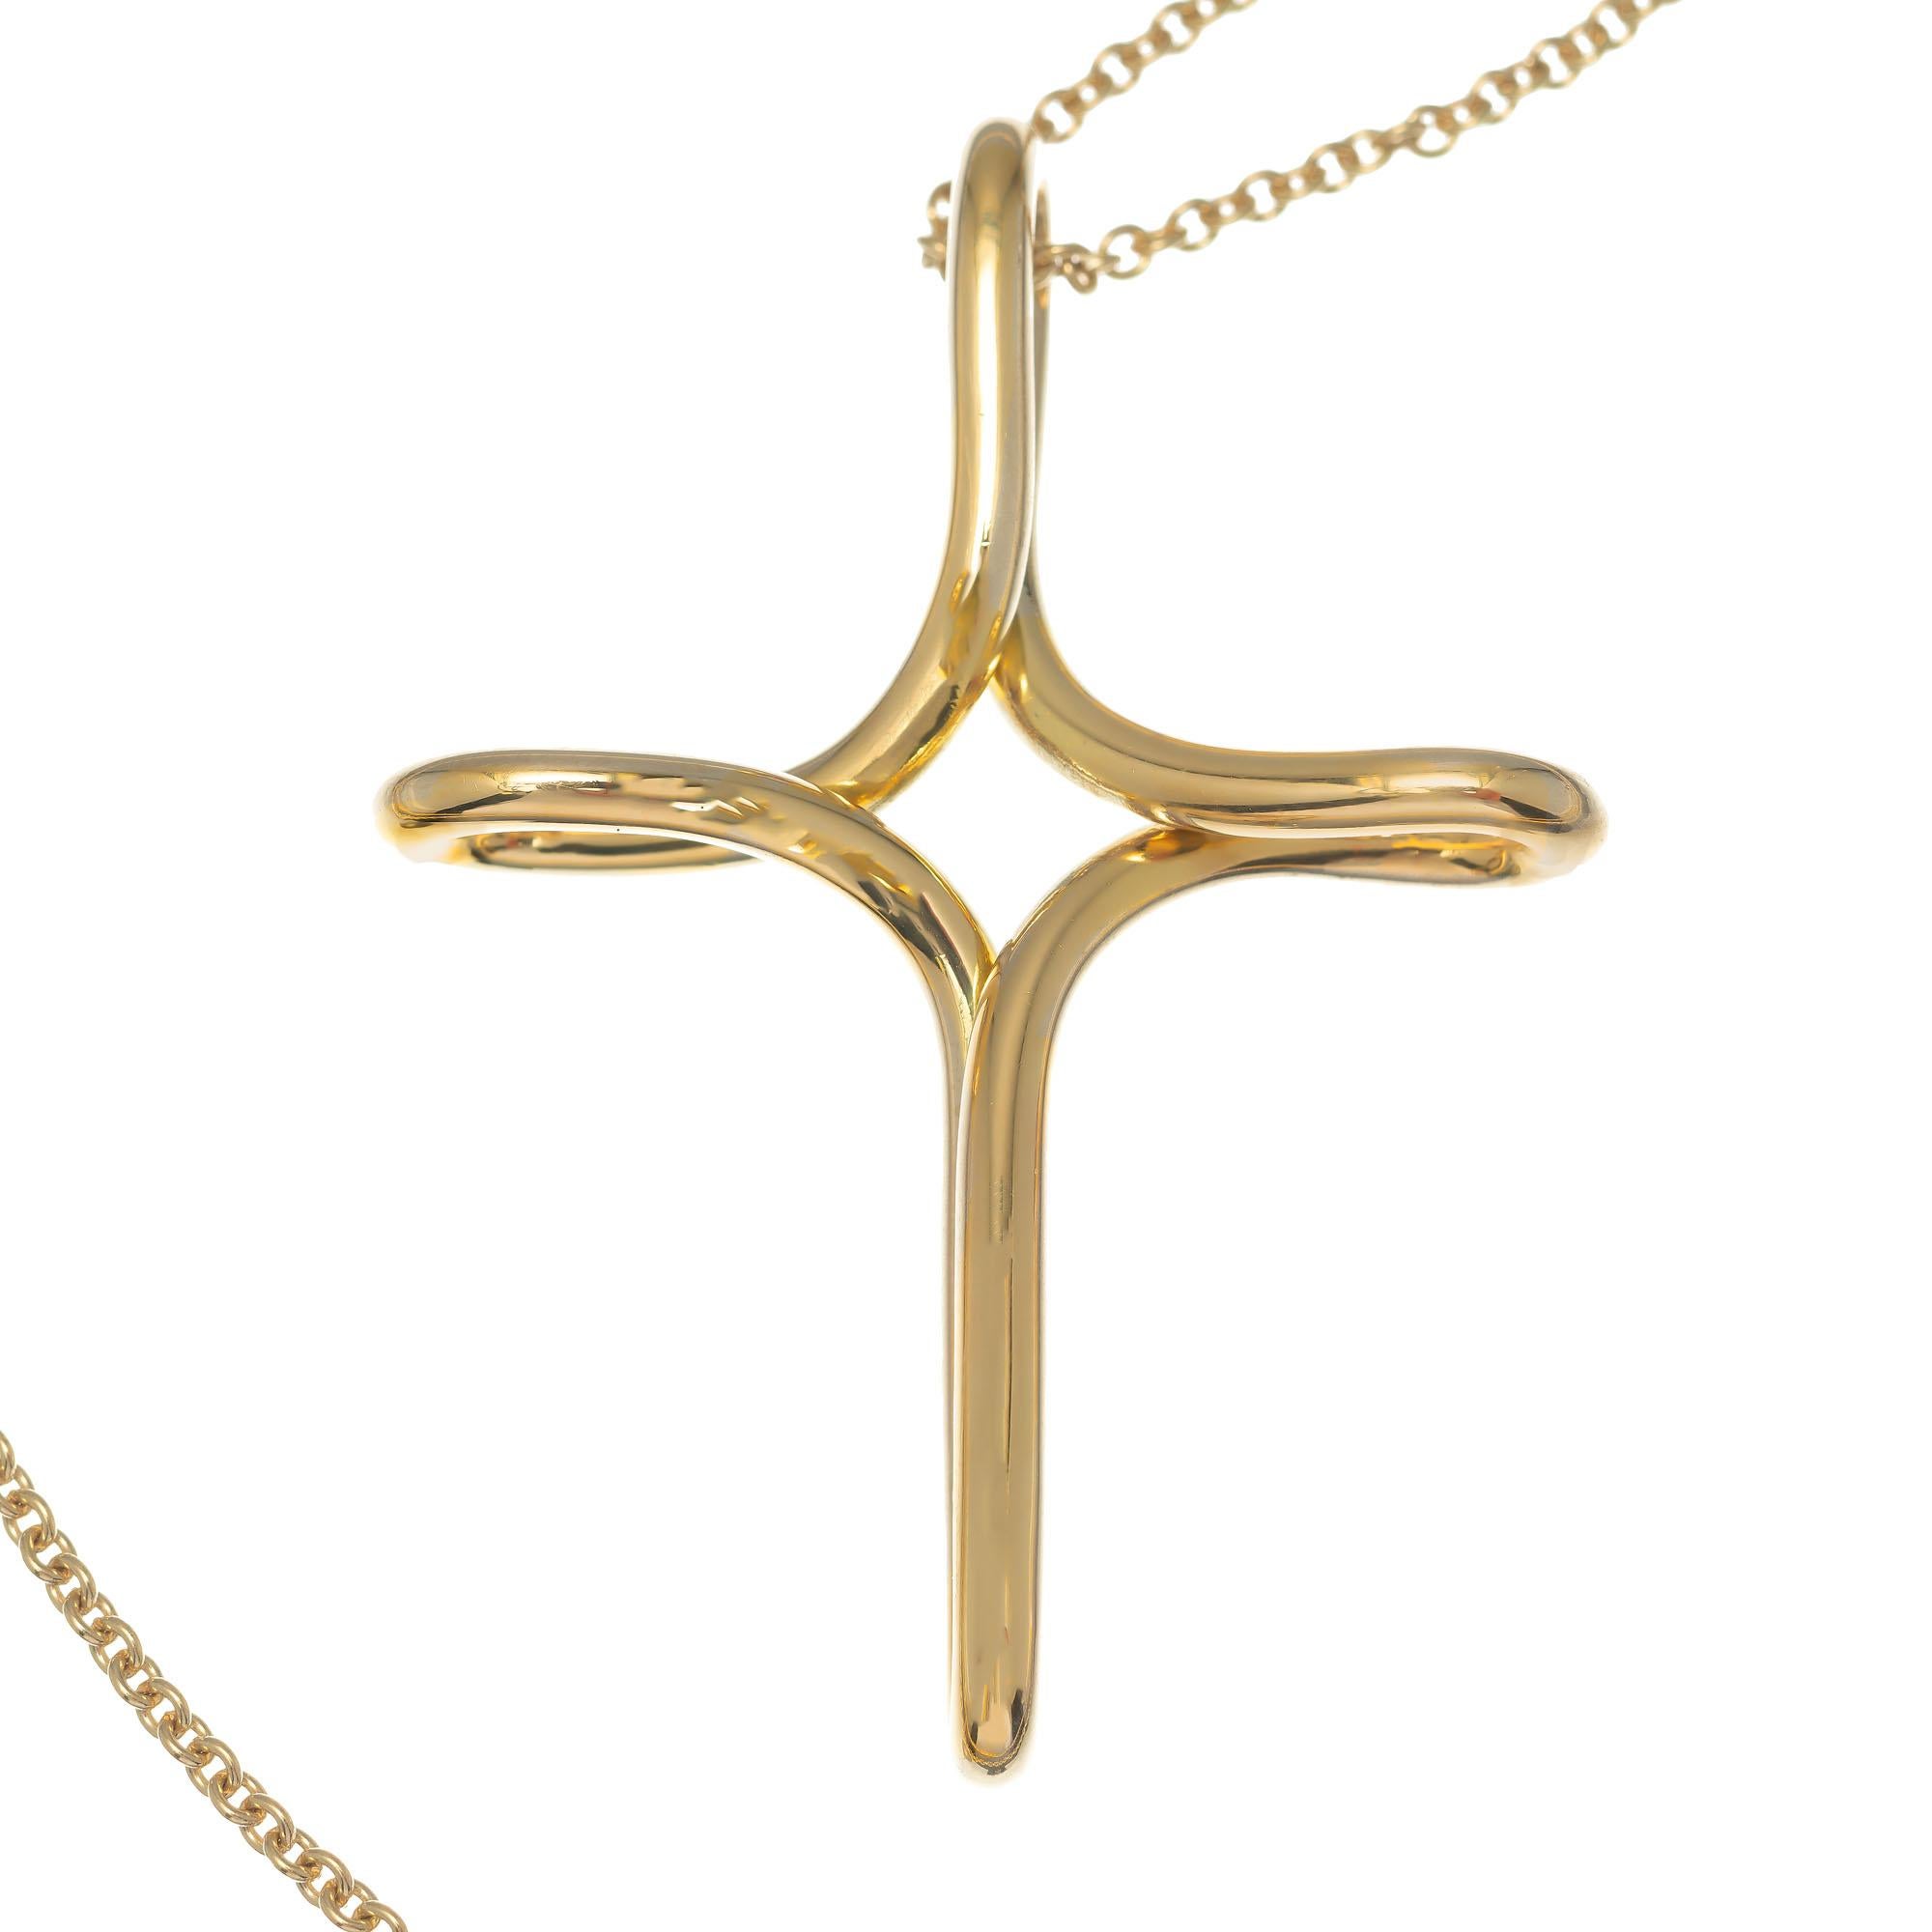 Elsa Peretti Design for Tiffany & Co. 18k yellow gold Infinity cross pendant necklace, considered large size, suspended from a 30 Inch 18k yellow gold link chain. Both pieces clearly marked with Tiffany & Co hallmarks and gold content

18k yellow